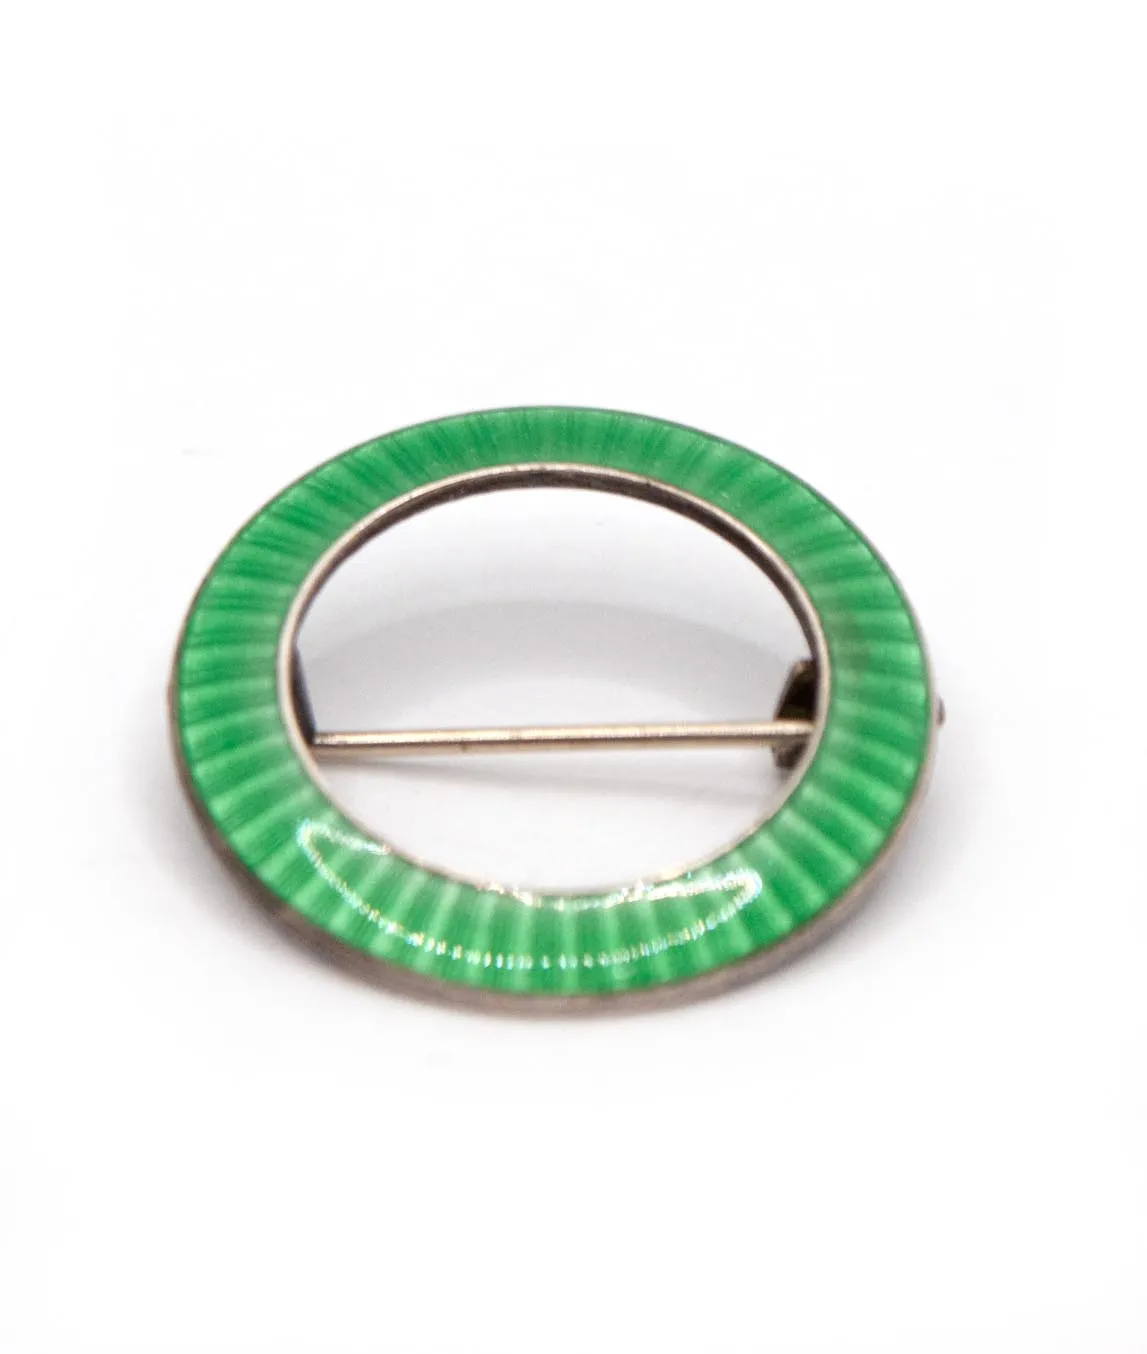 JA&S green enamelled ring shaped brooch pin set in silver on a white background